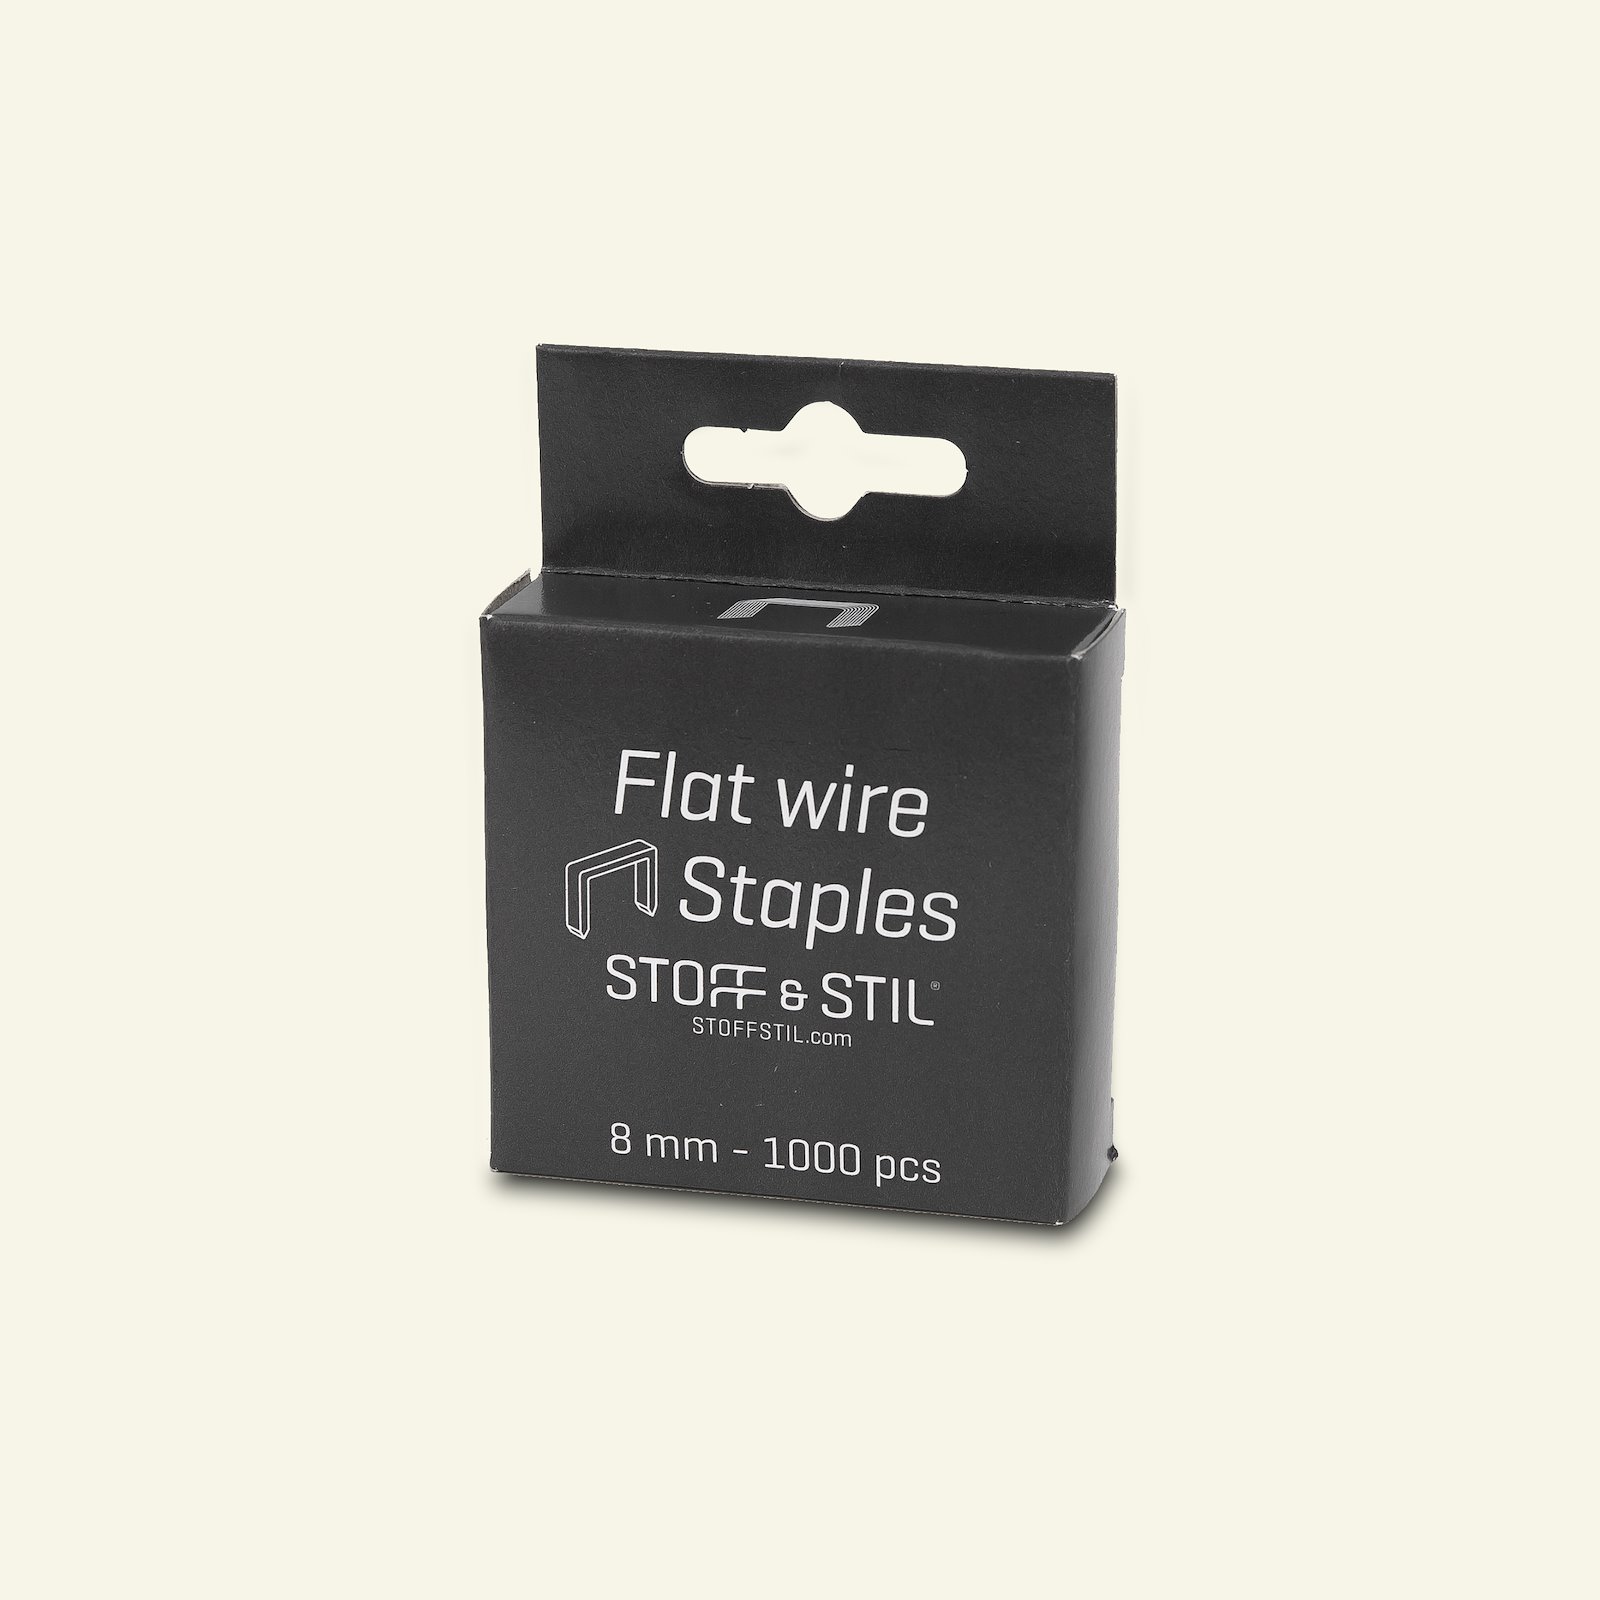 Flat wire stables 8mm for 29811 1000 pcs 29821_pack_b